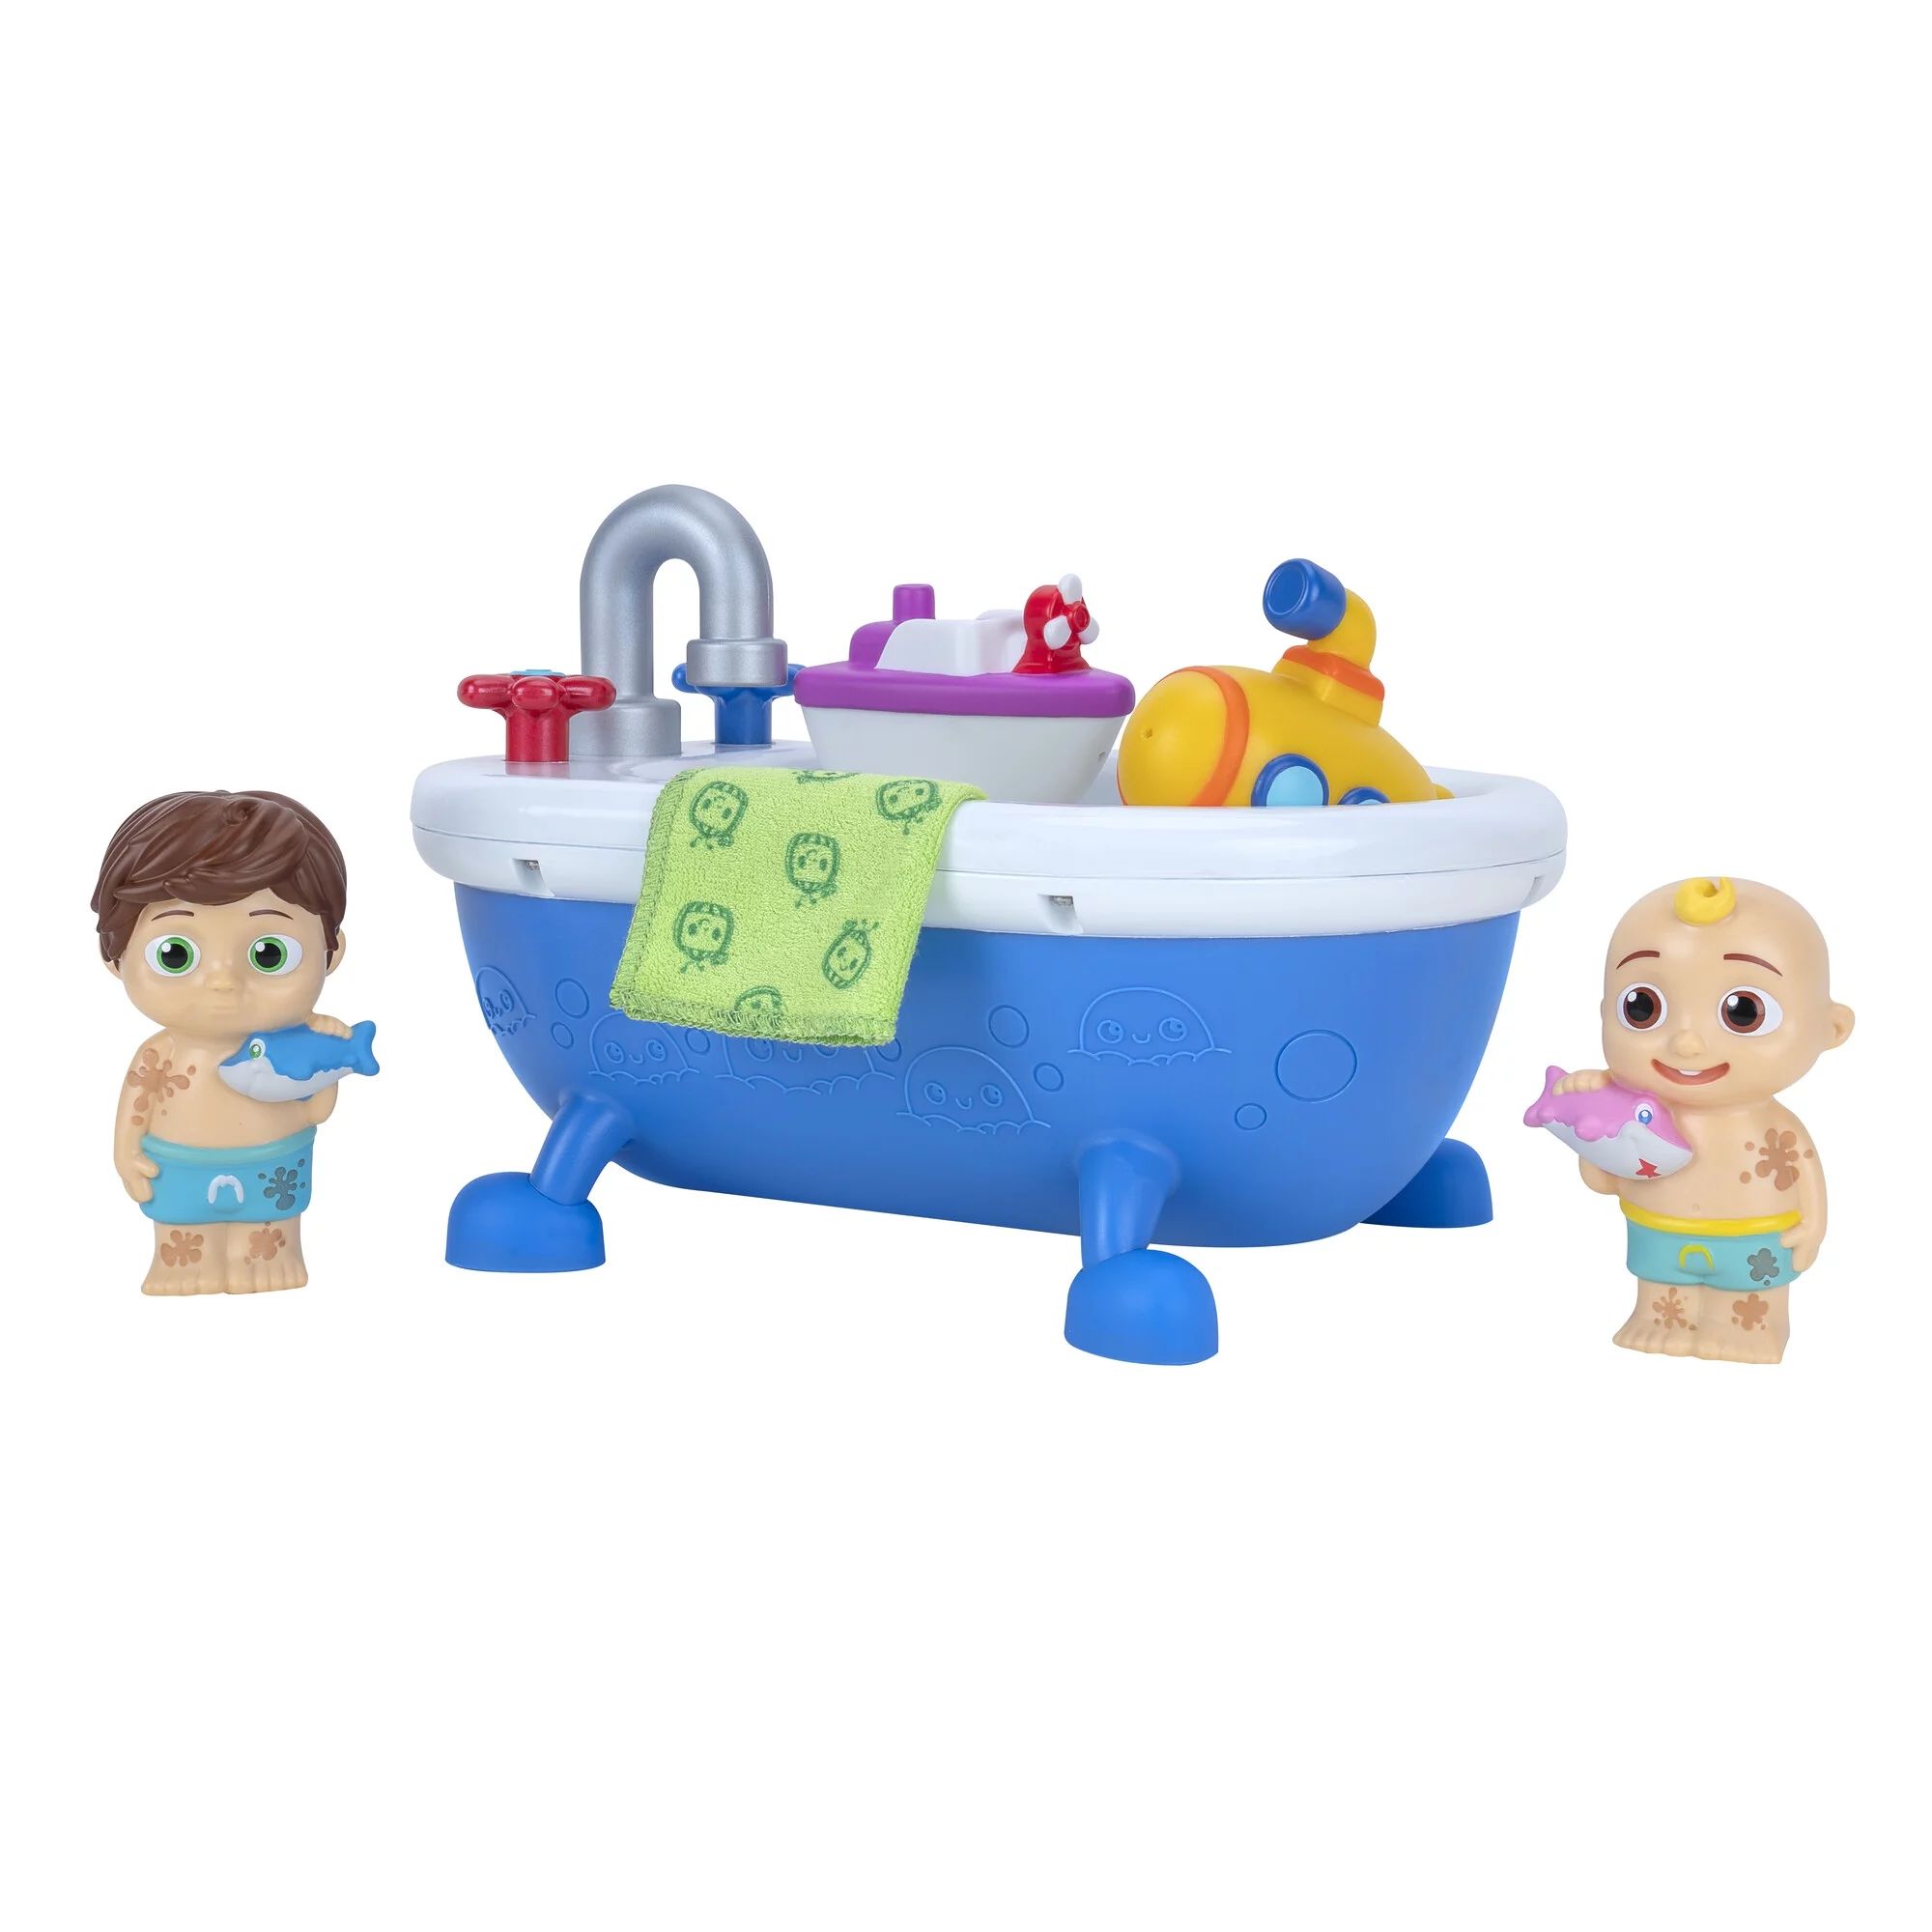 CoComelon Musical Bathtime Playset - Plays Clips of the ‘Bath Song’ - Features 2 Color Change... | Walmart (US)